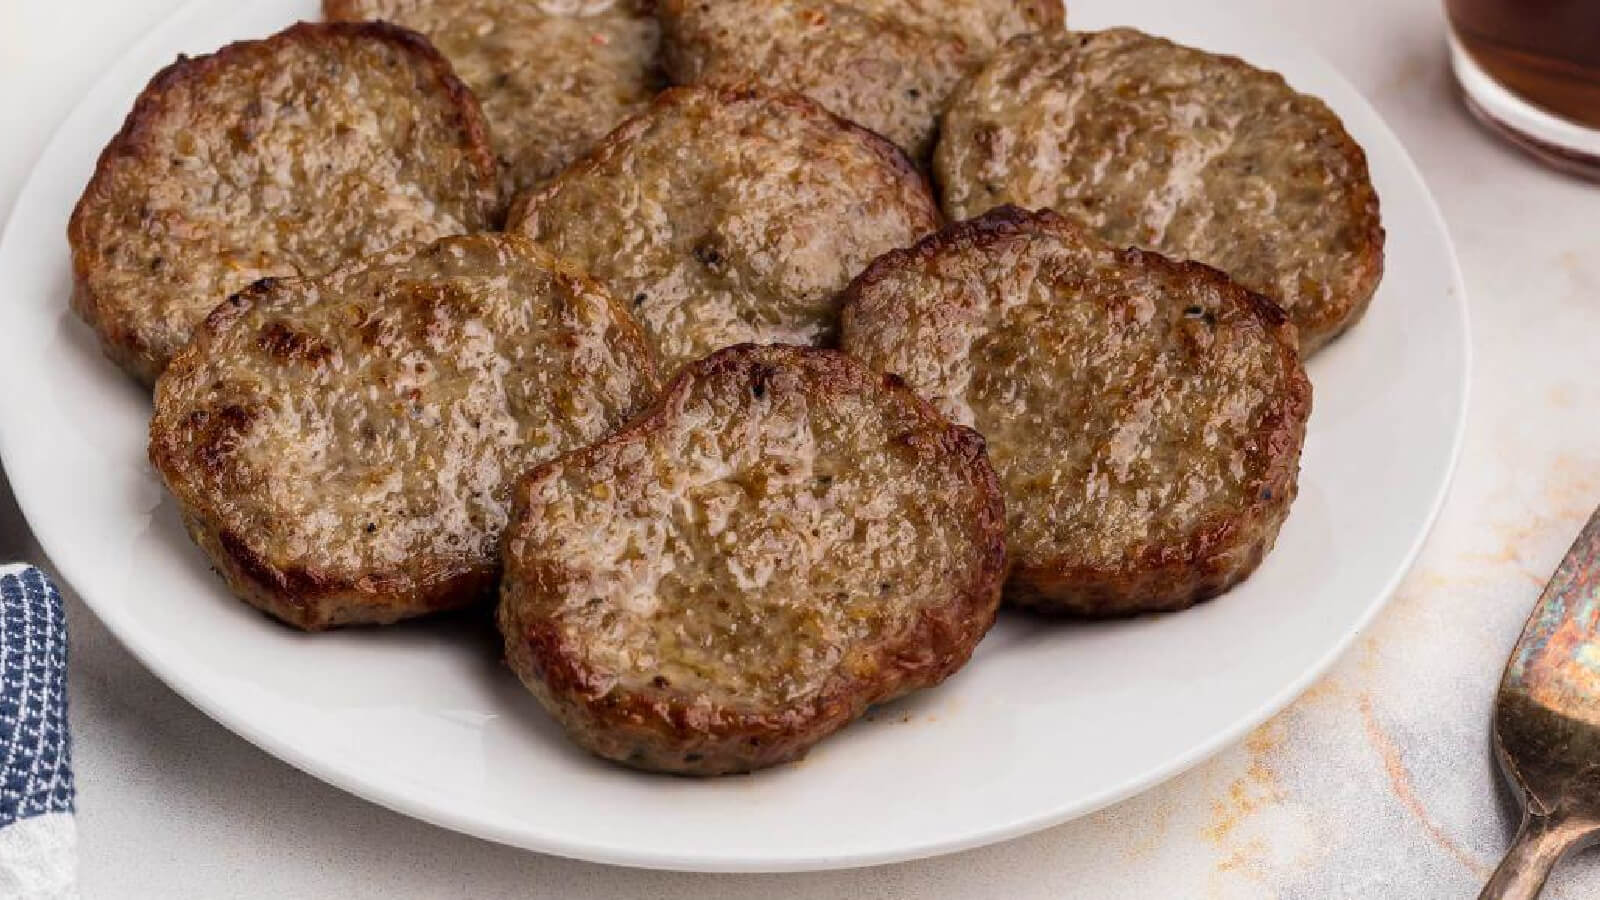 sausage patties made in the air fryer and served on a white plate.